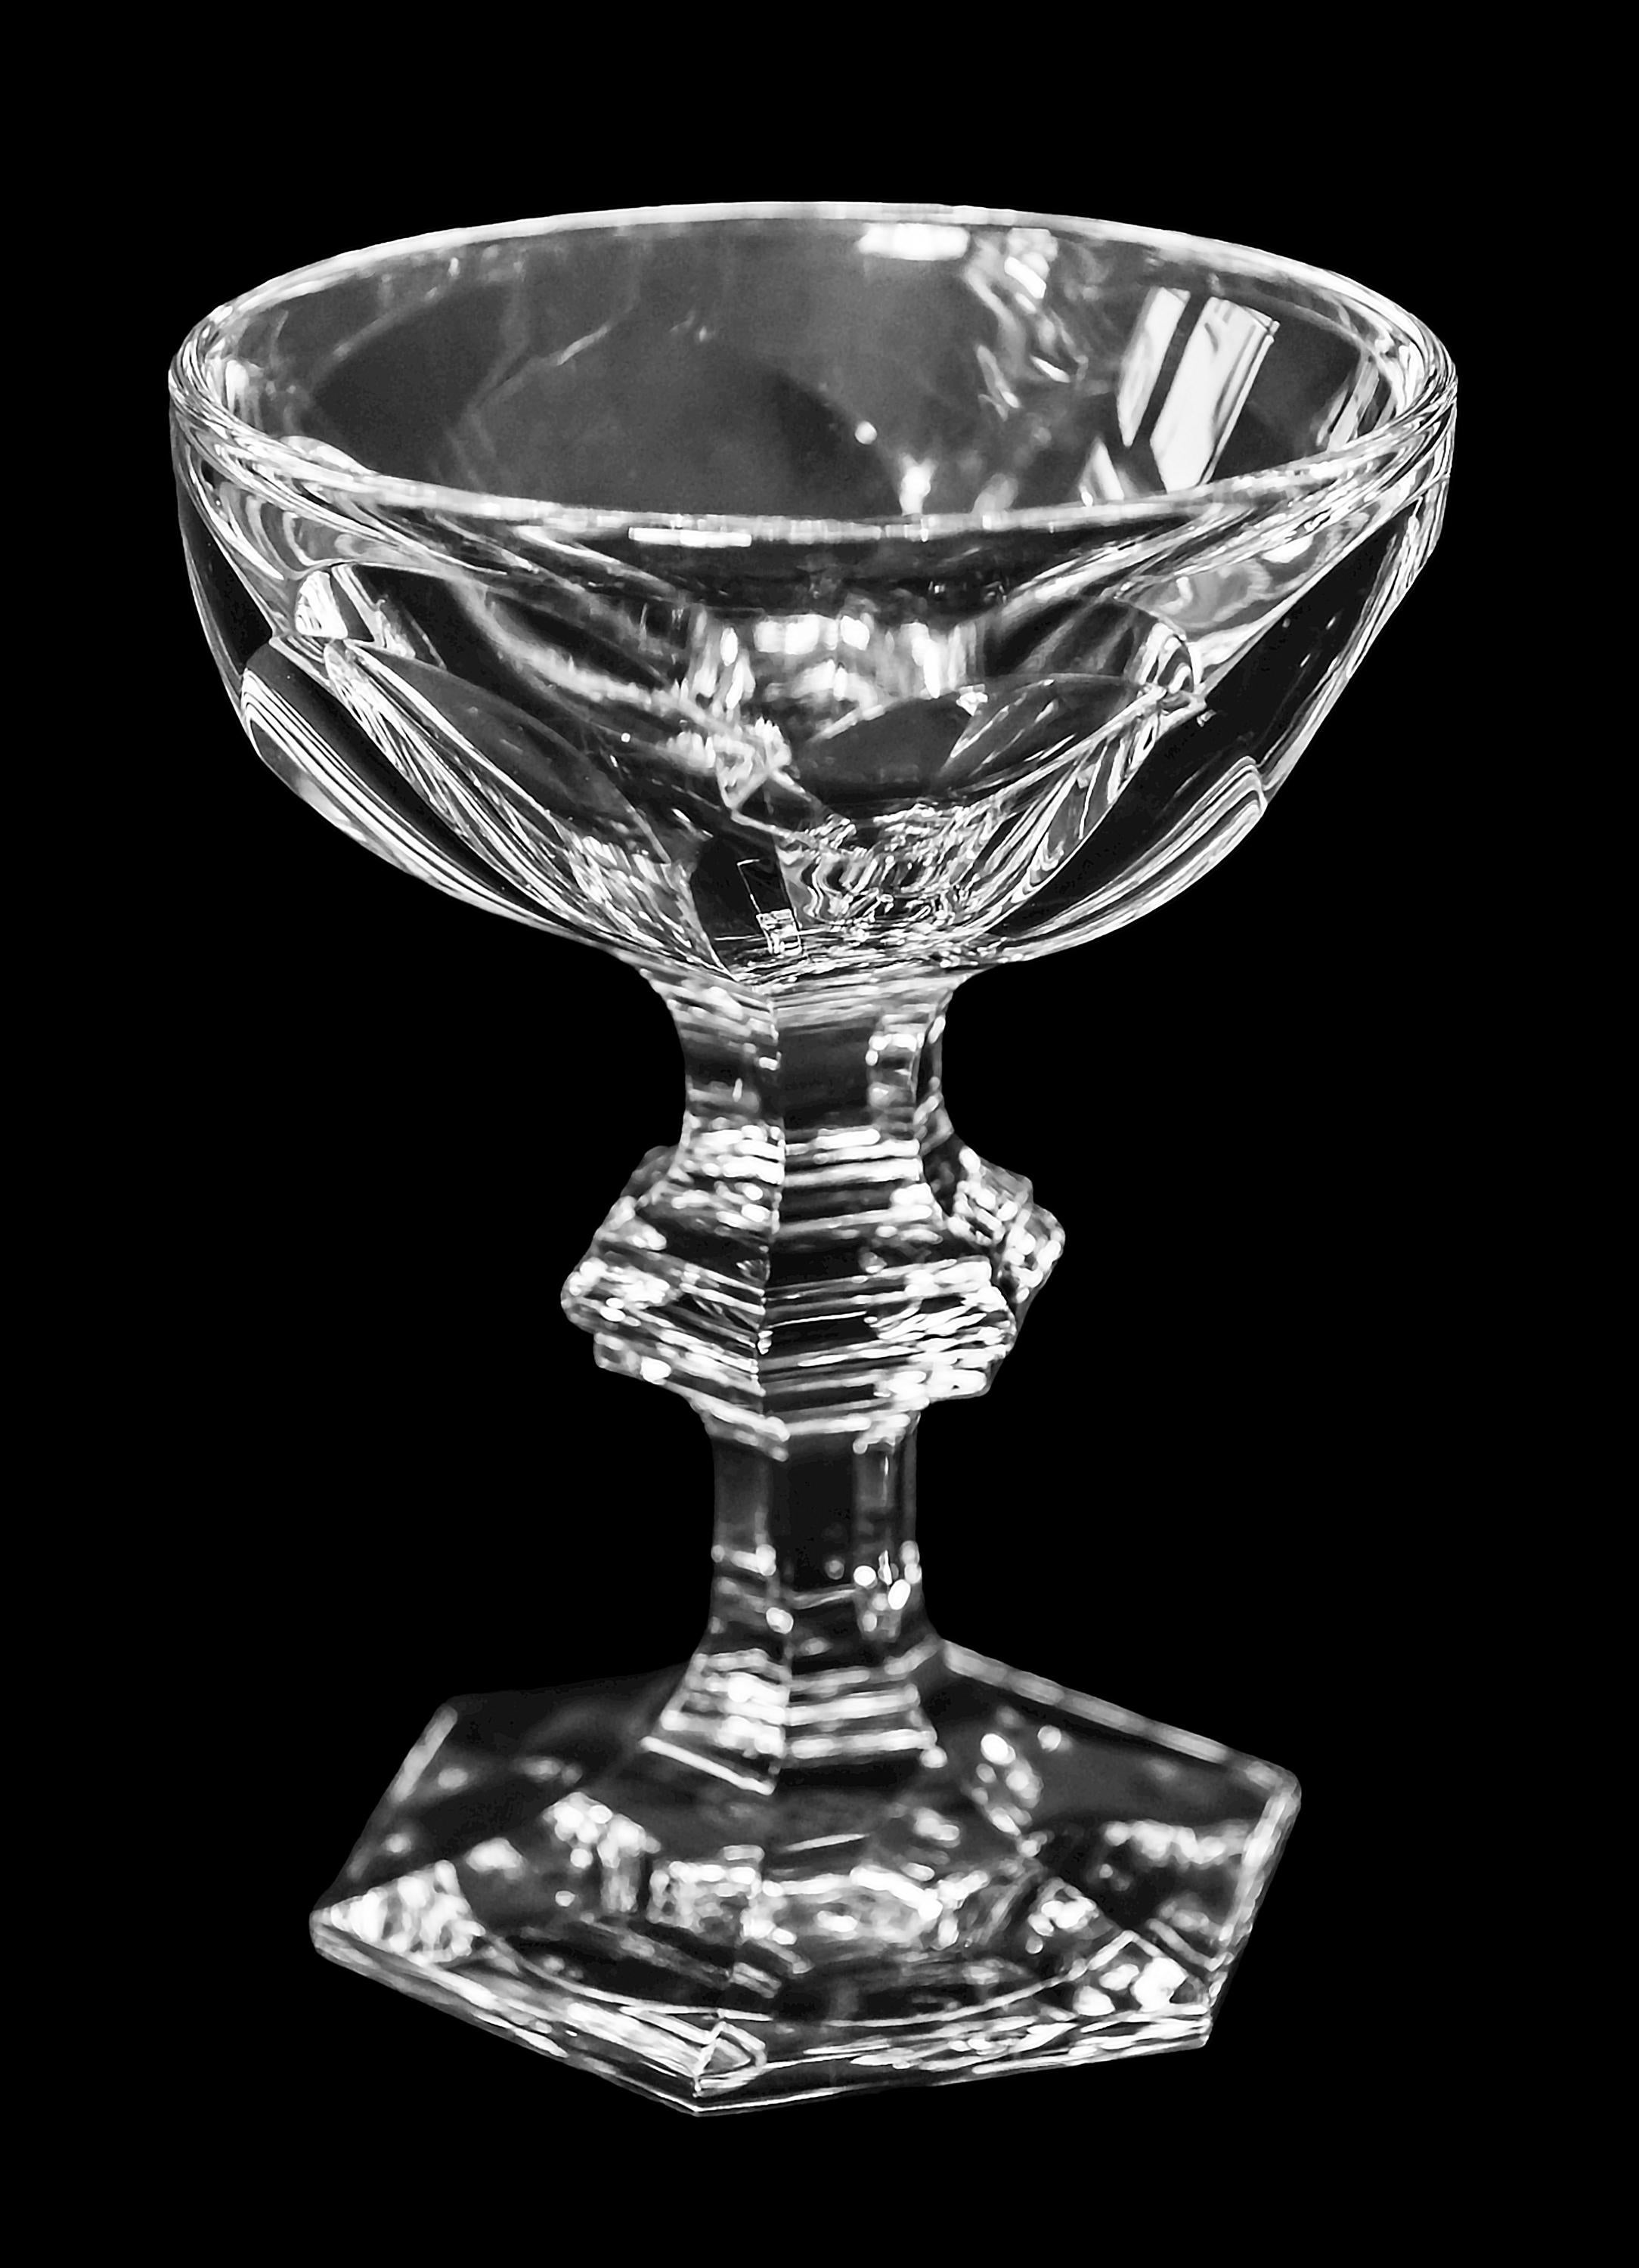 Set of 6 pcs. Baccarat Harcourt 1841 collection champagne coupes.
Marked on the bottom.
Excellent /like new condition.

